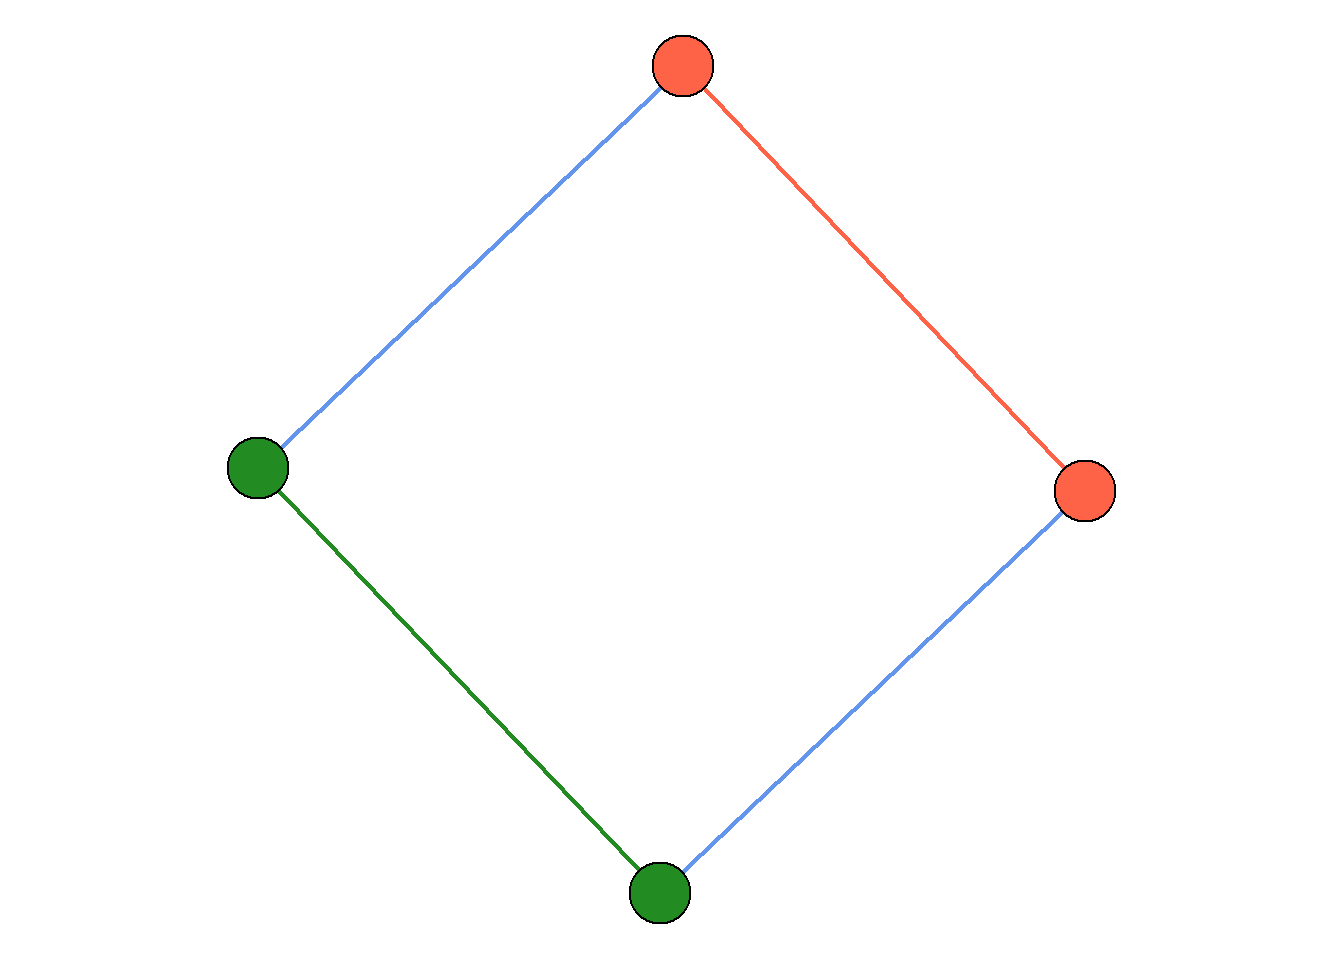 A social-ecological motif following the conventions of Bodin and Tengo (2012). Orange nodes are social, with orange social-social edges. Green nodes are ecological, with green ecological-ecological connections. Blue edges represent social-ecological connections.